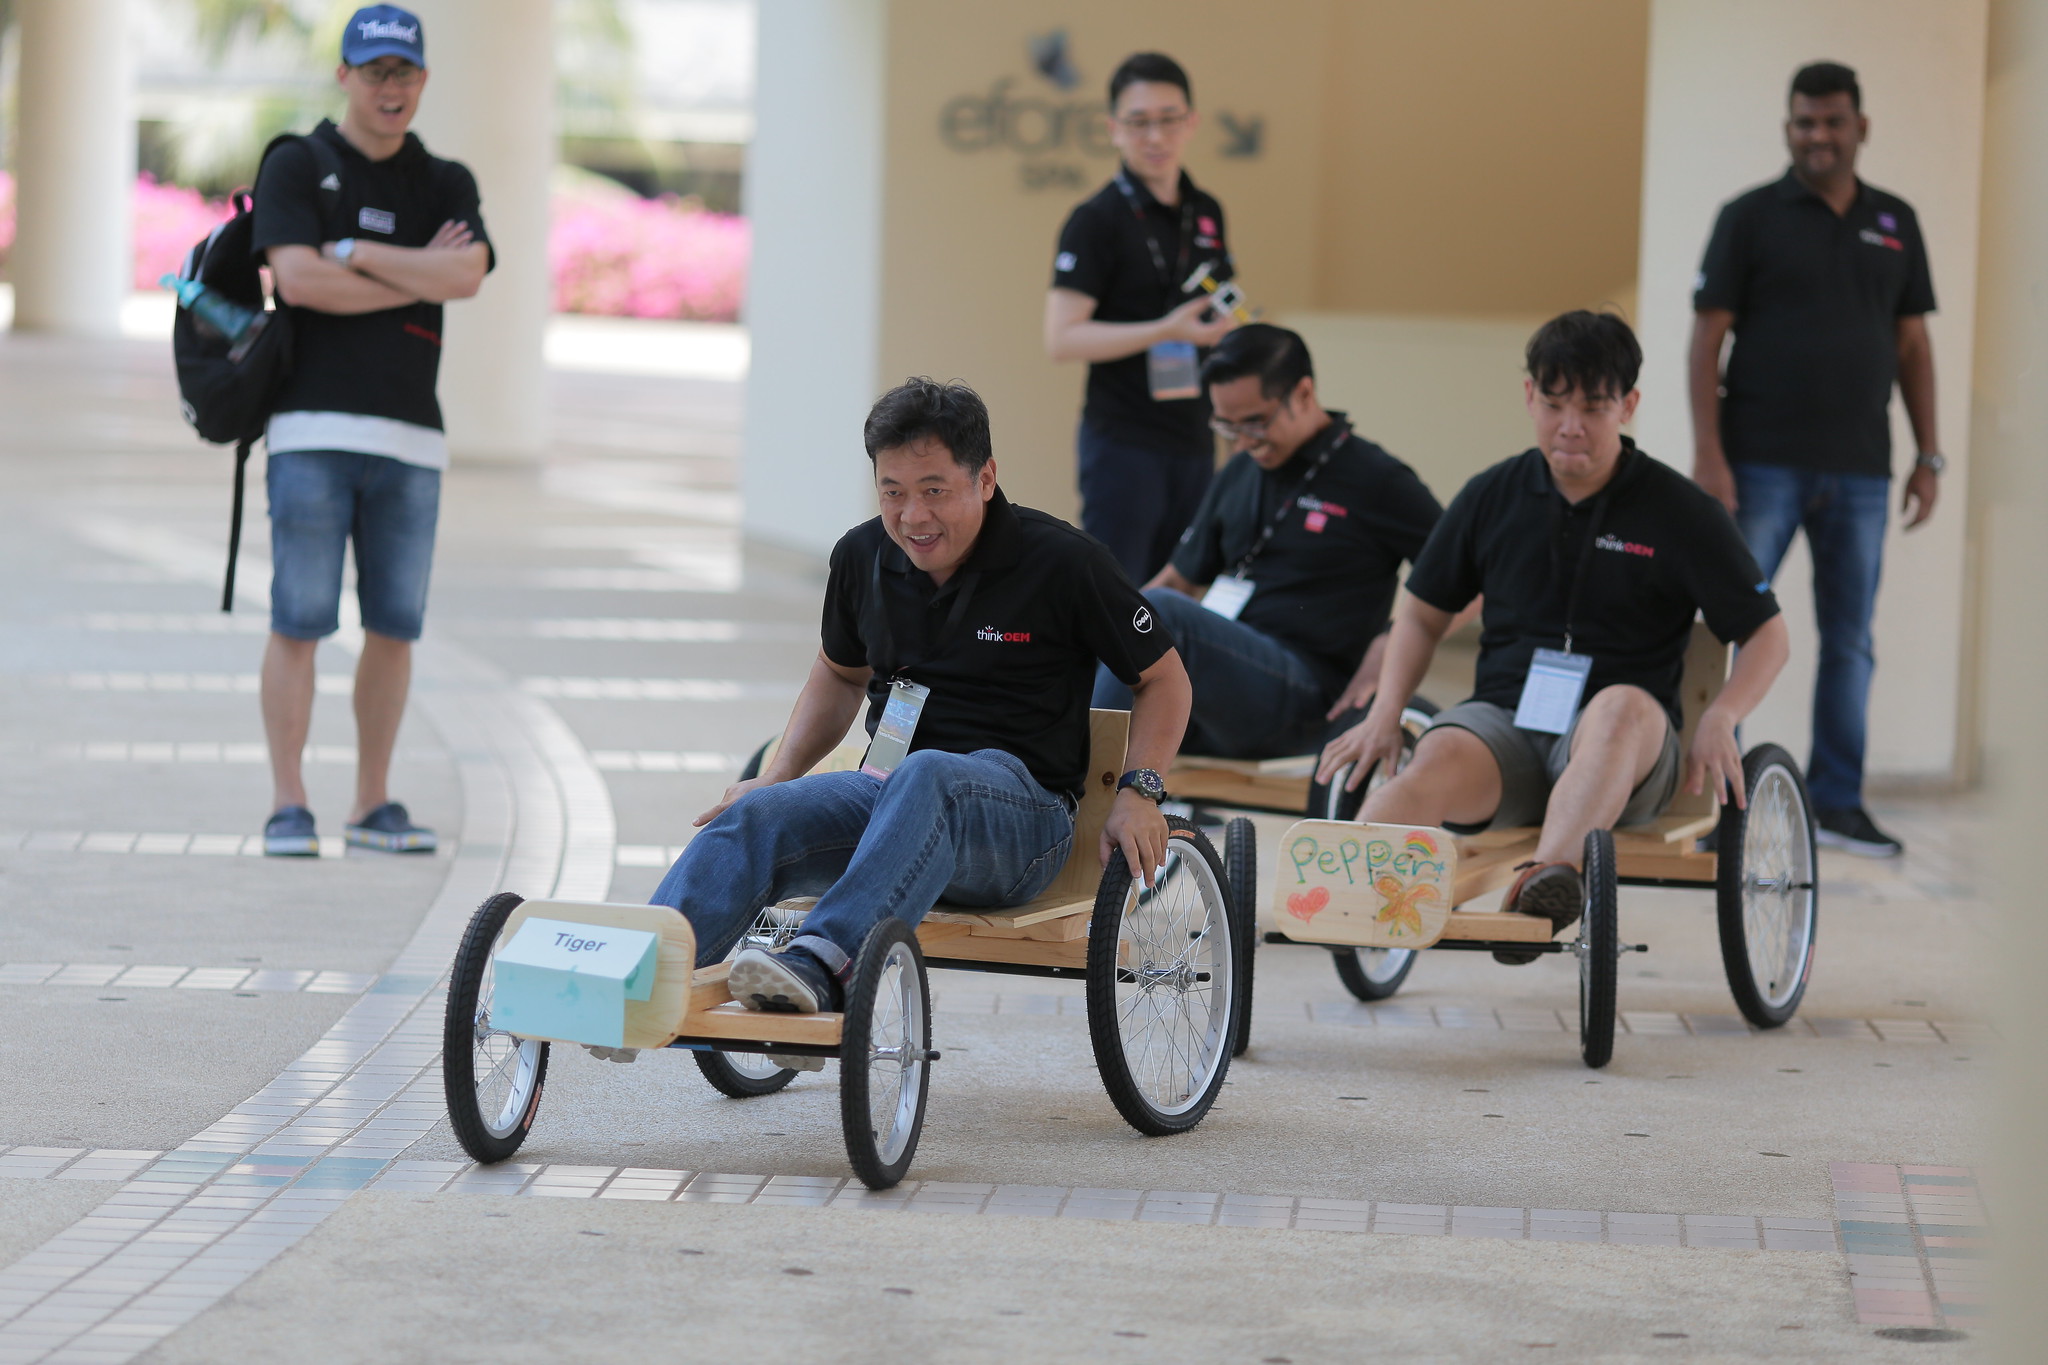 The highlight of the event was the racing challenge, where teams competed on a specially designed track